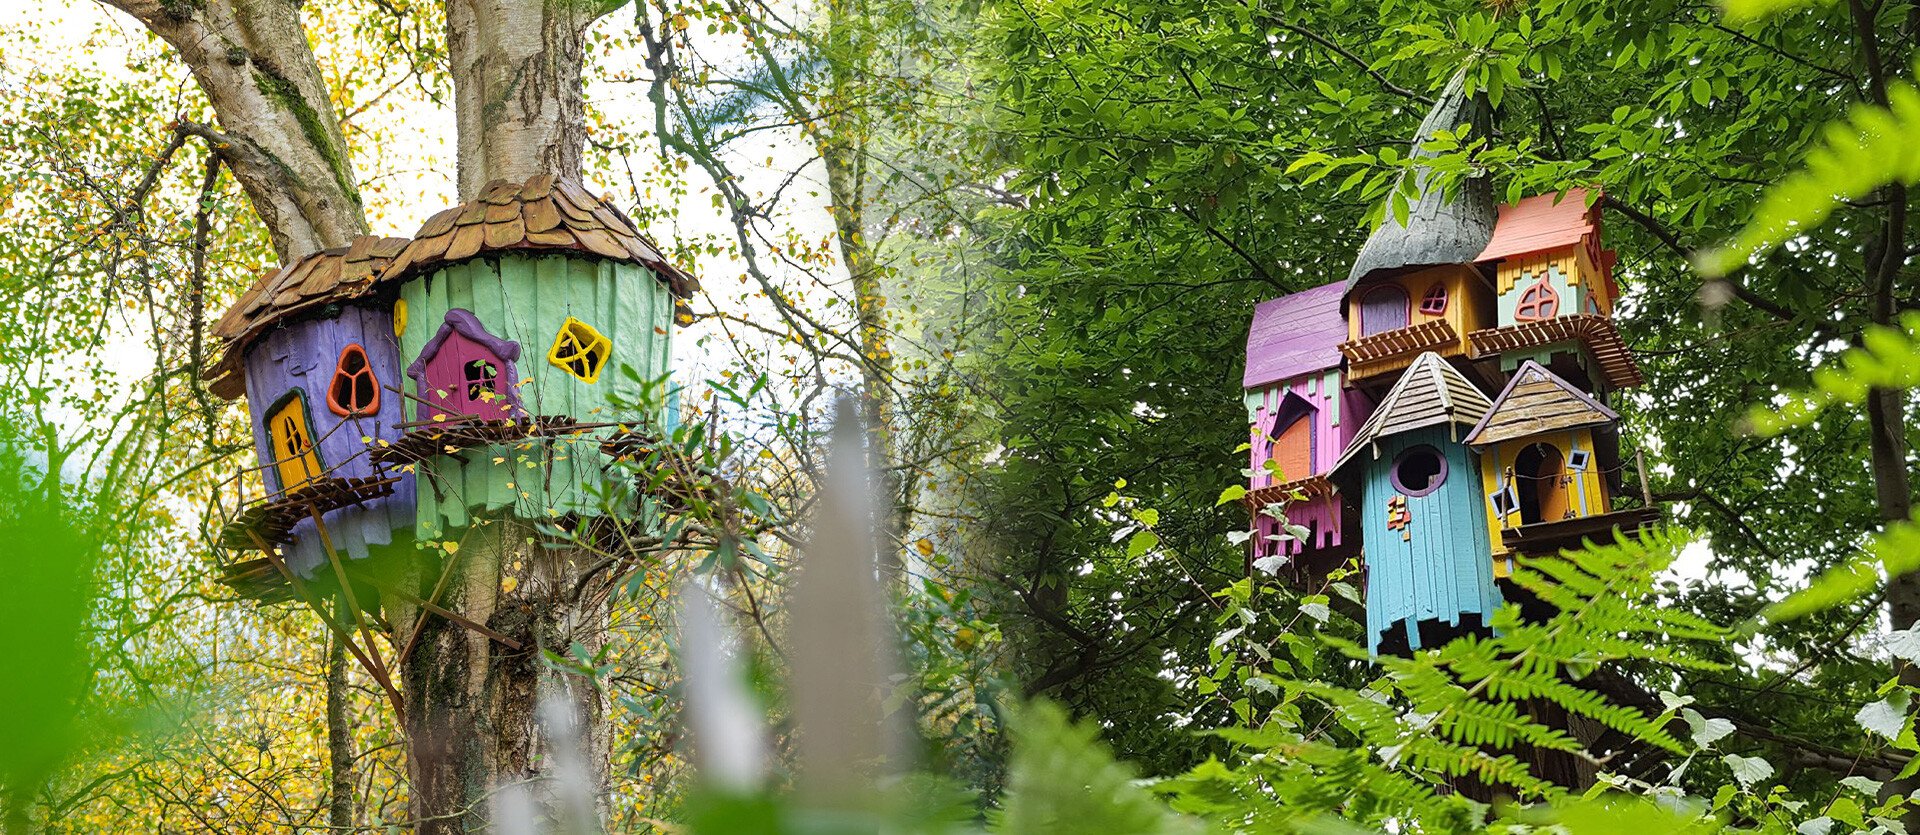 Twiggle houses in the trees at BeWILDerwood